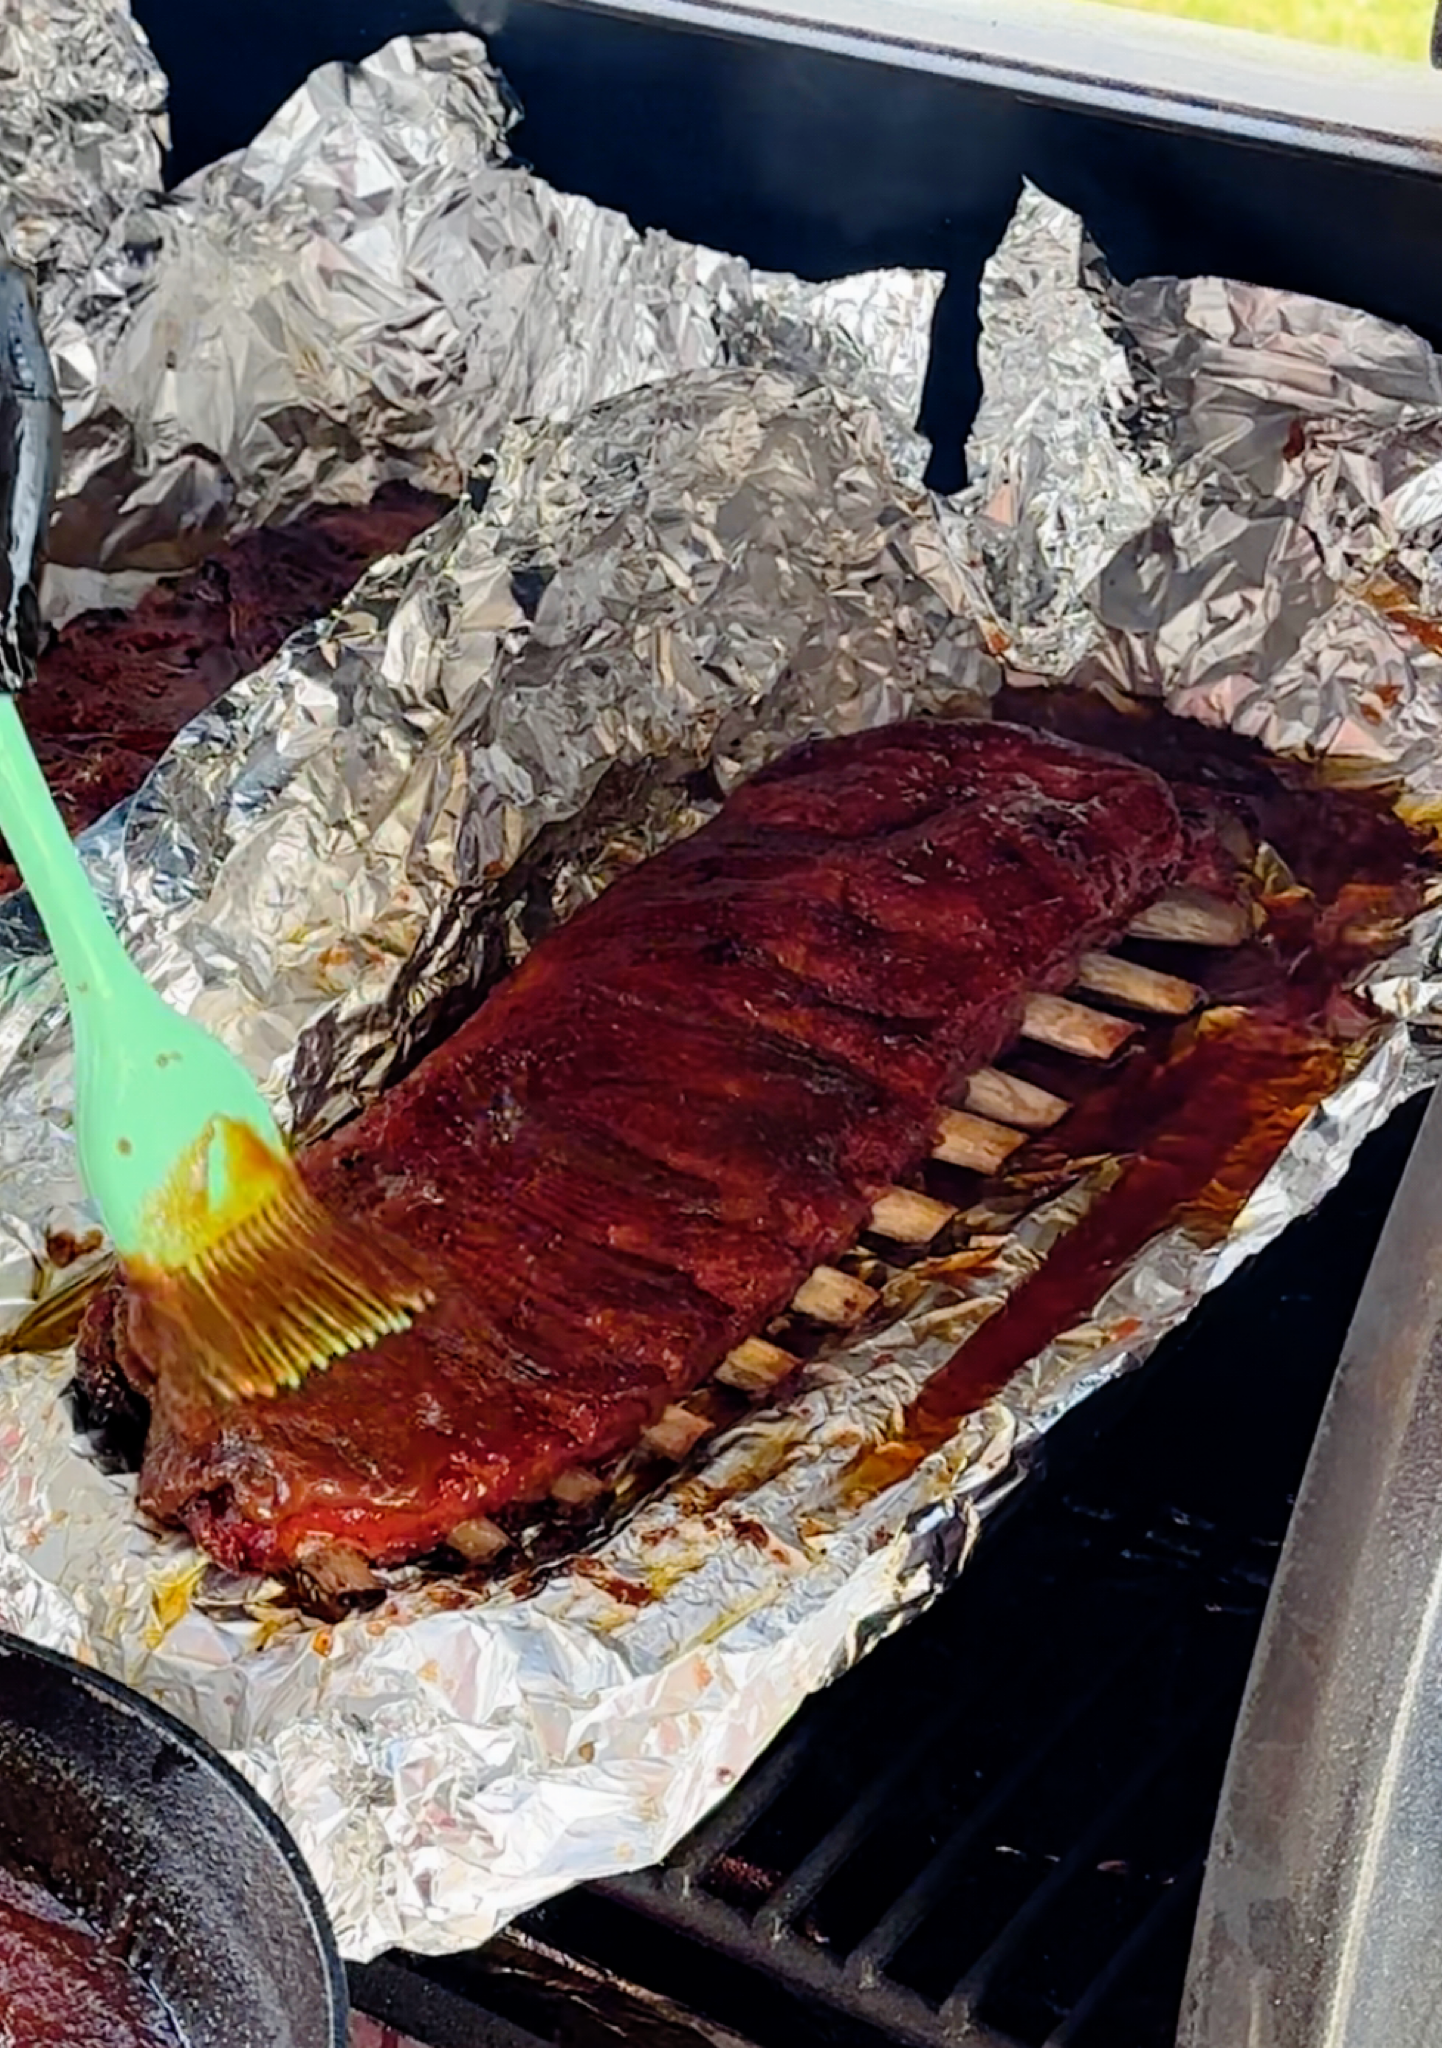 Brushing St. Louis style ribs with BBQ sauce. 